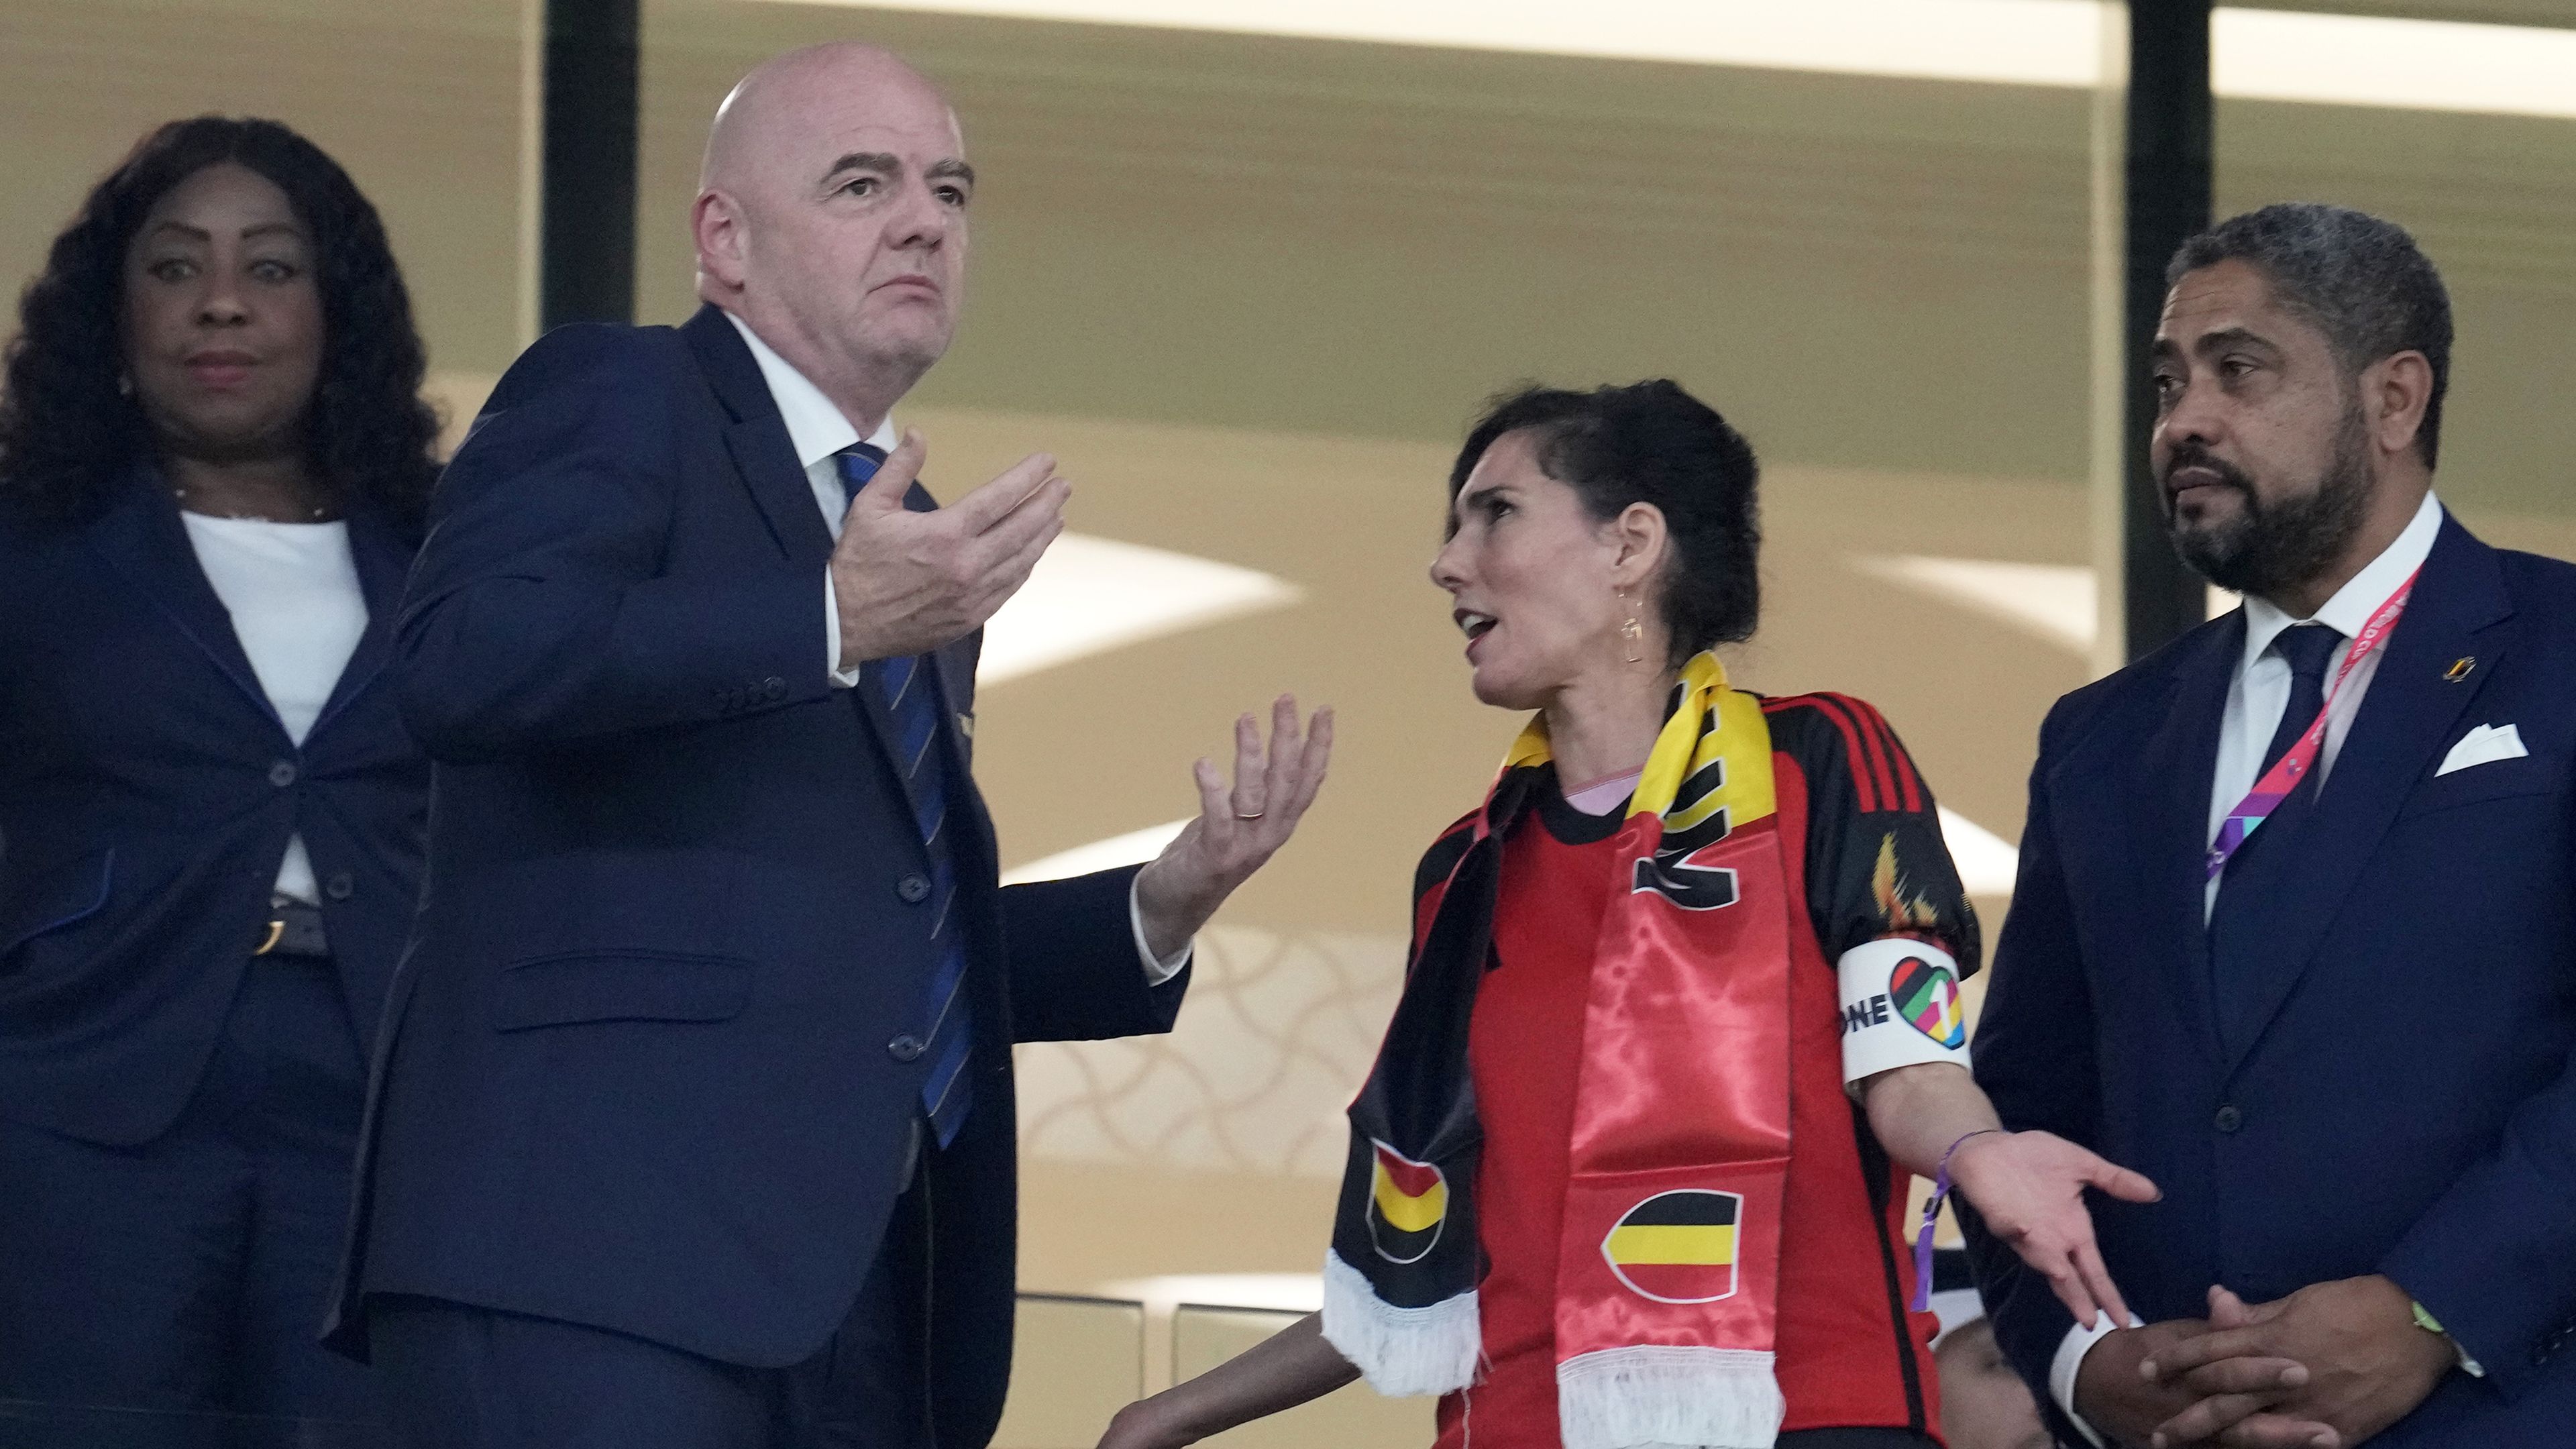 Belgium Foreign Minister Hadja Lahbib, wearing a &quot;One Love&quot; armband, talks with FIFA President Gianni Infantino, left, on the tribune during the World Cup group F soccer match between Belgium and Canada, at the Ahmad Bin Ali Stadium in Doha, Qatar, Wednesday, Nov. 23, 2022. (AP Photo/Natacha Pisarenko)